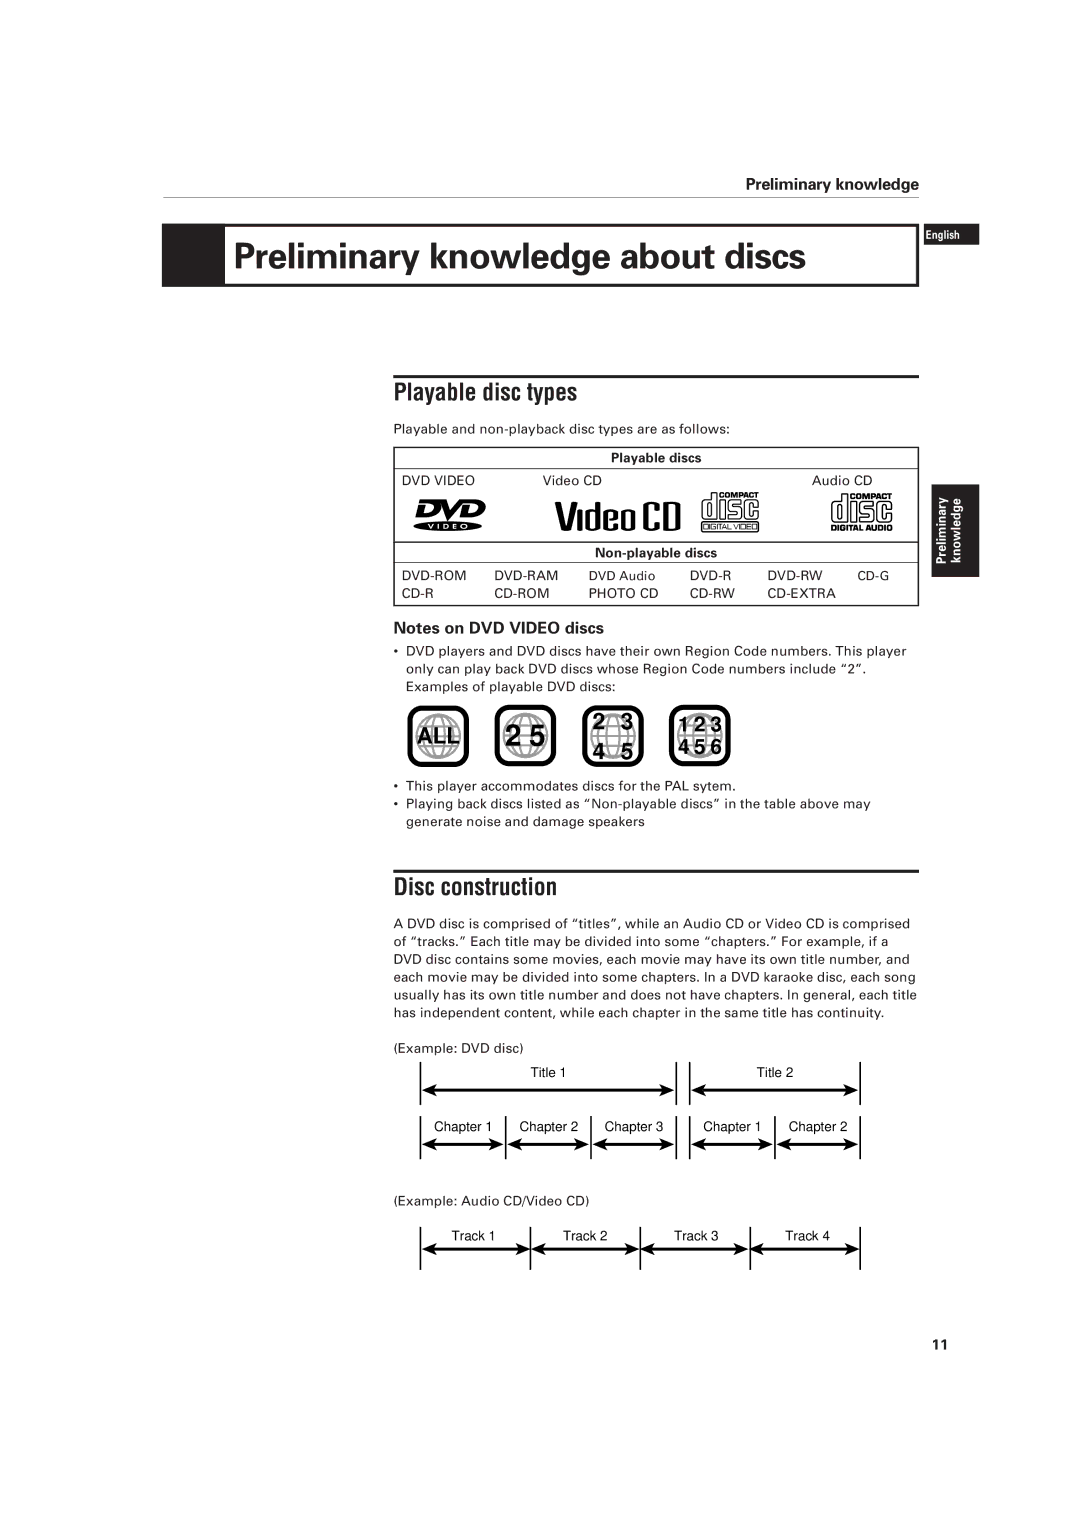 JVC XV-D701BK manual Preliminary knowledge about discs, Playable disc types, Disc construction, Playable discs 